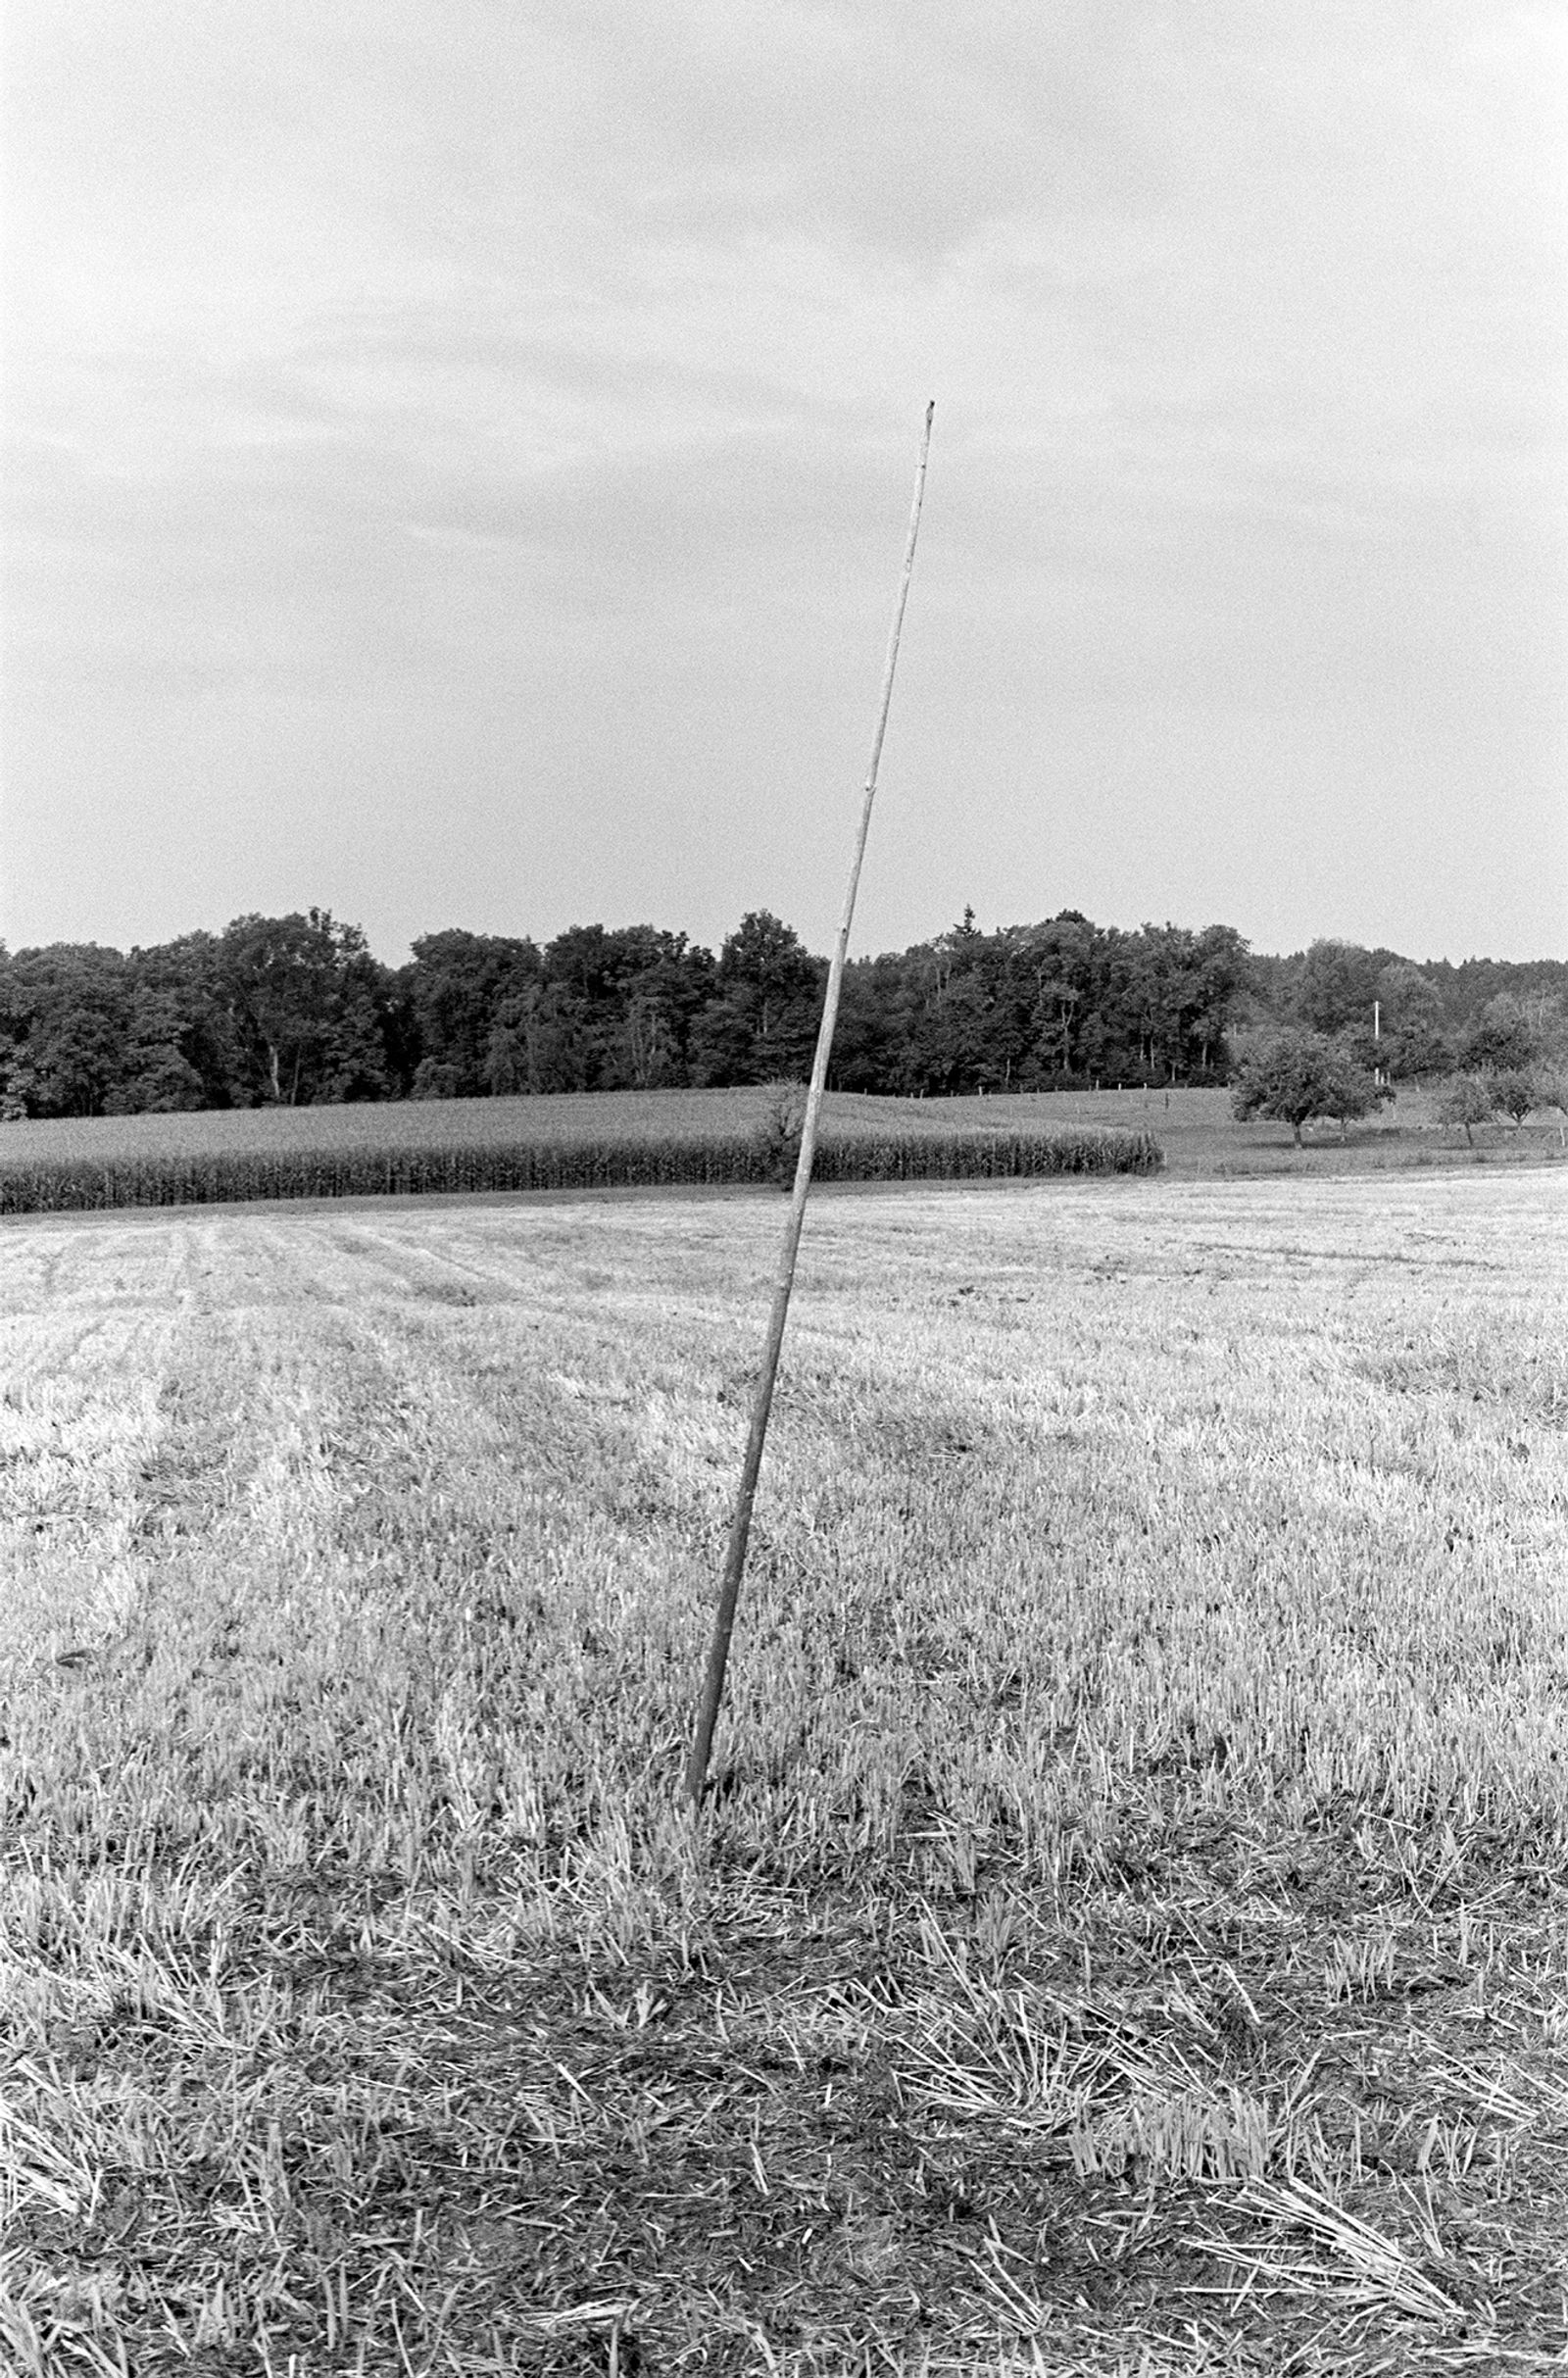 © Sarah Walzer - Image from the Weites Feld (Wide Field) photography project